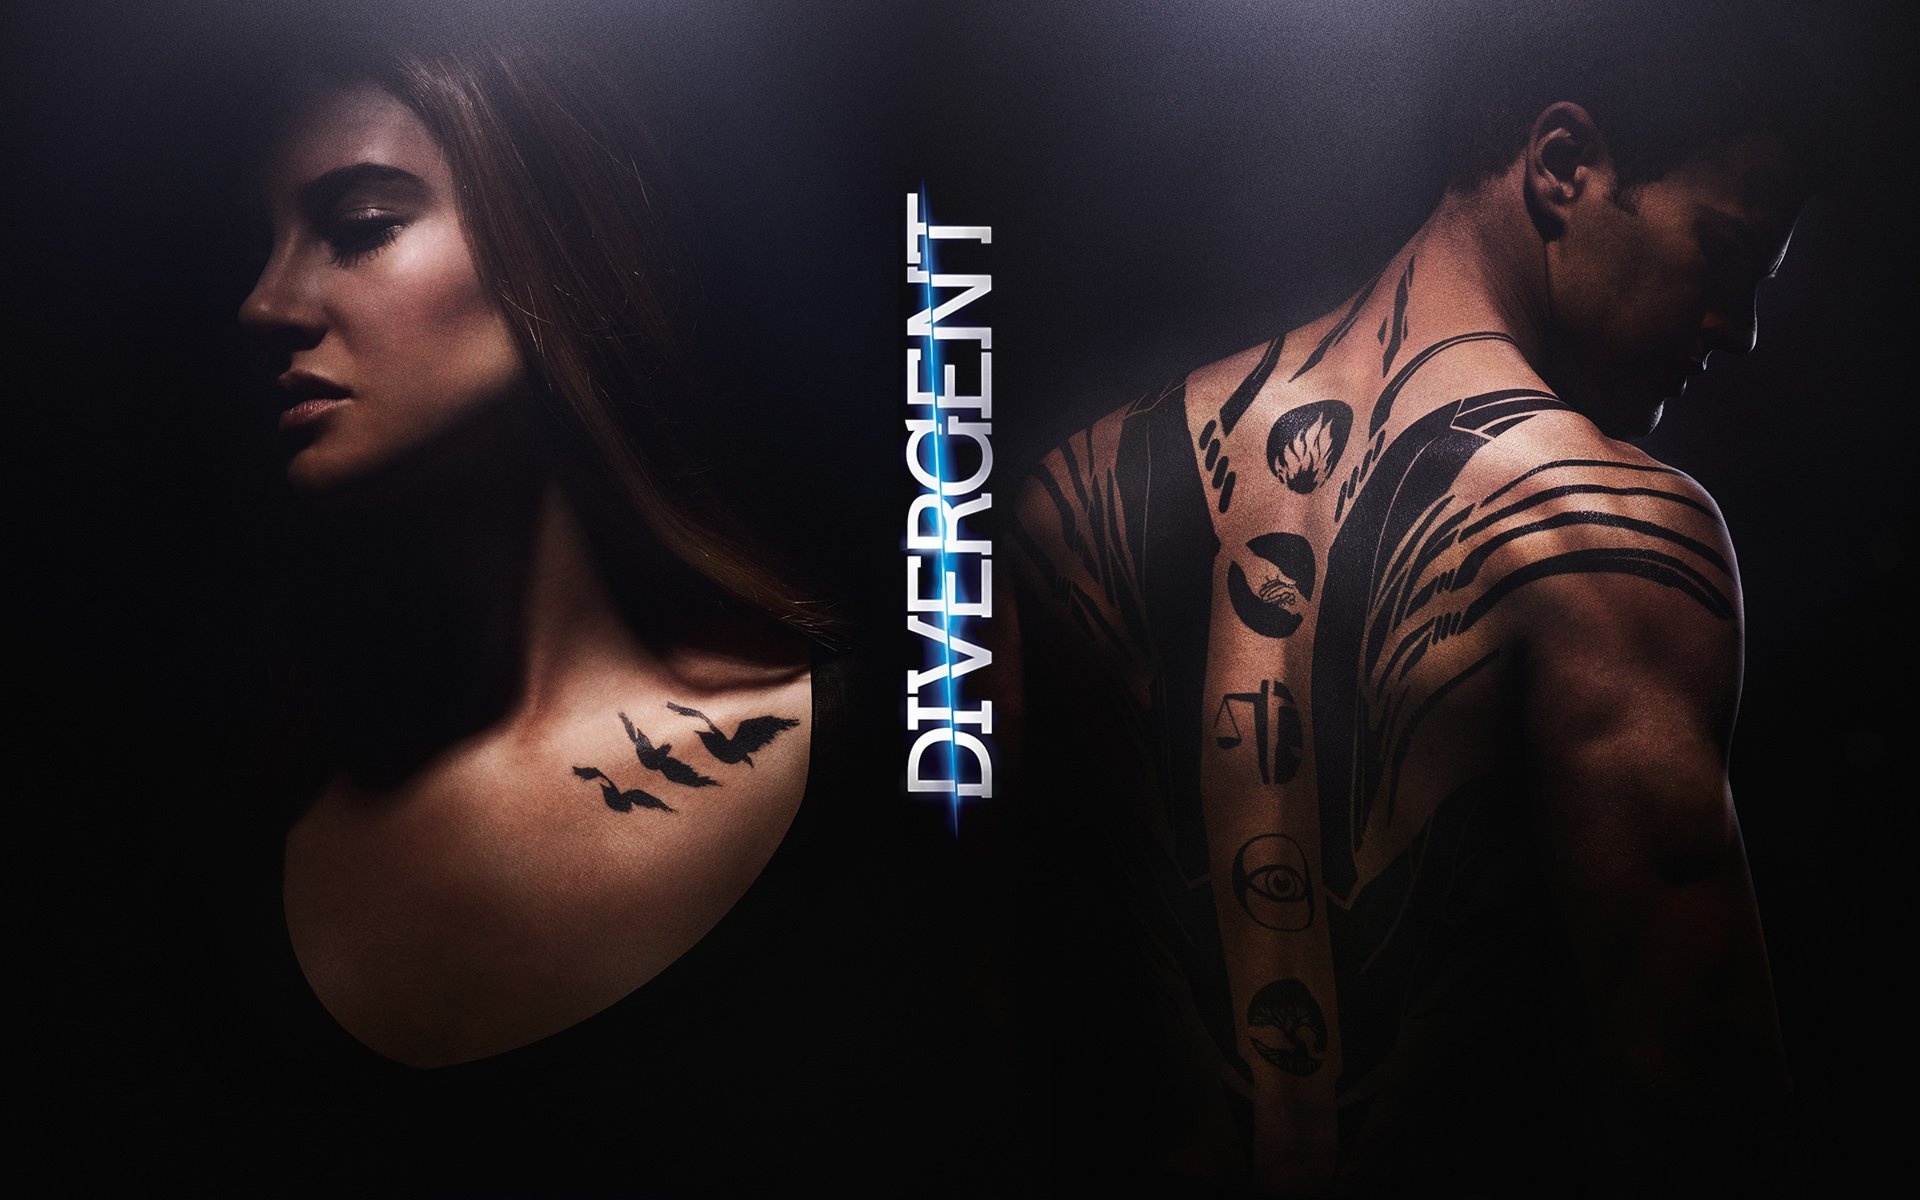 Quotes from Divergent movie, Identity quotes, 1920x1200 HD Desktop